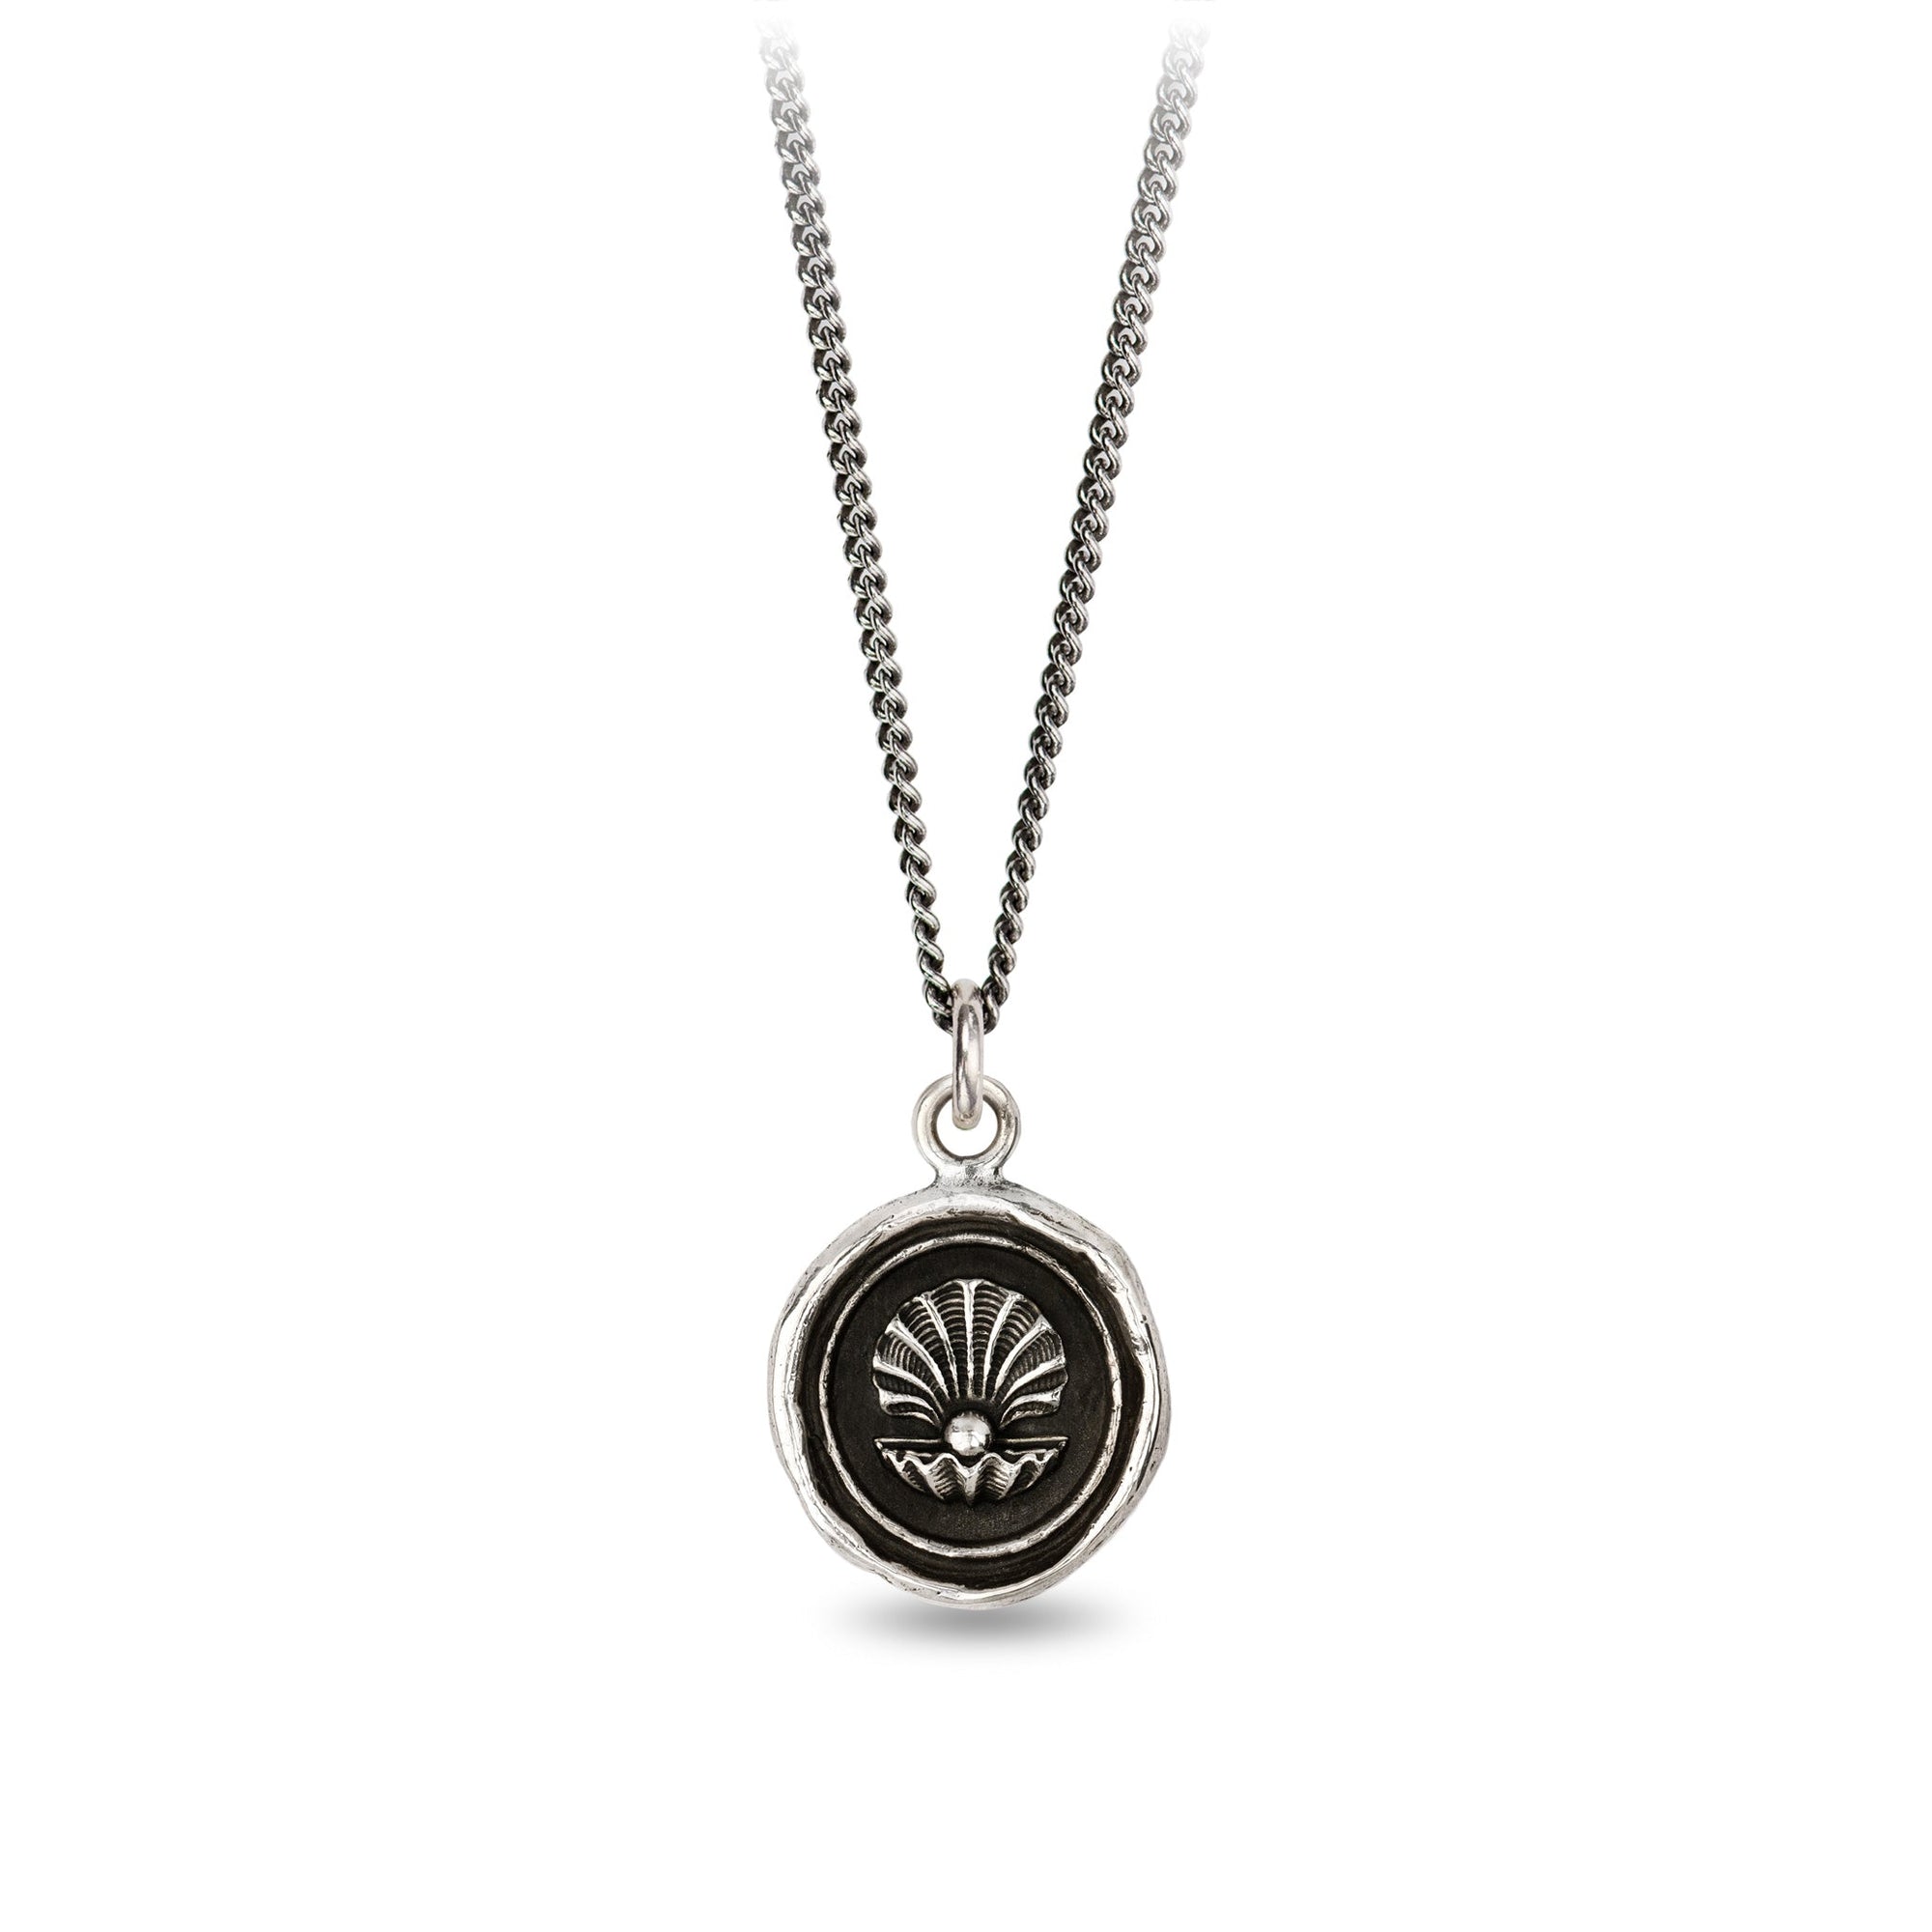 The World is Your Oyster Talisman Necklace